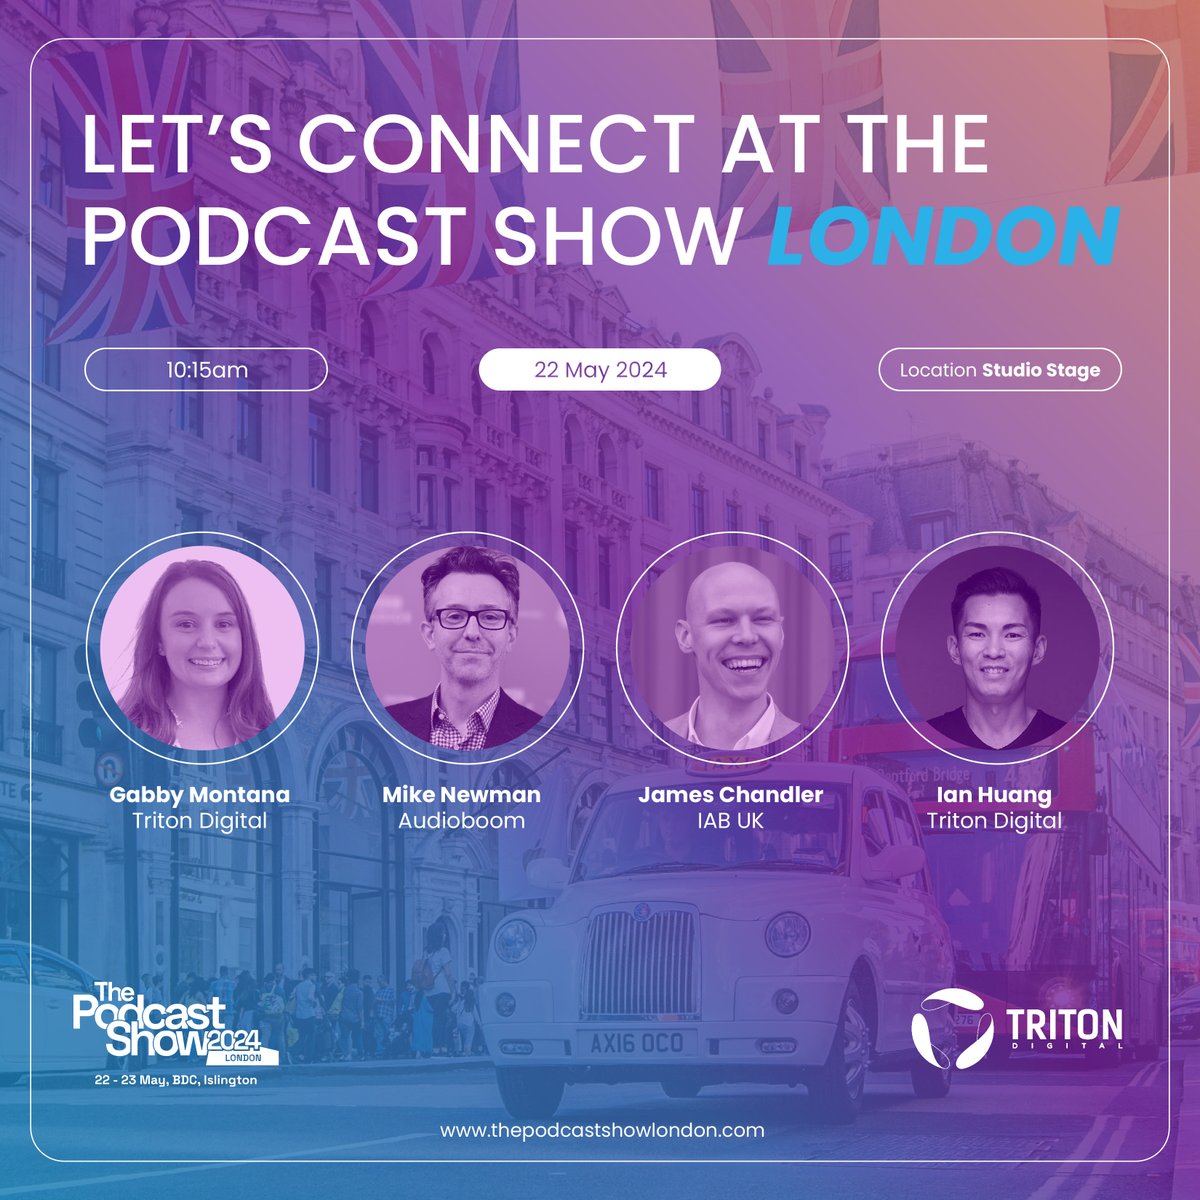 Where does #video fit within the #podcast ecosystem? Learn more next week at @PodcastShowLDN!